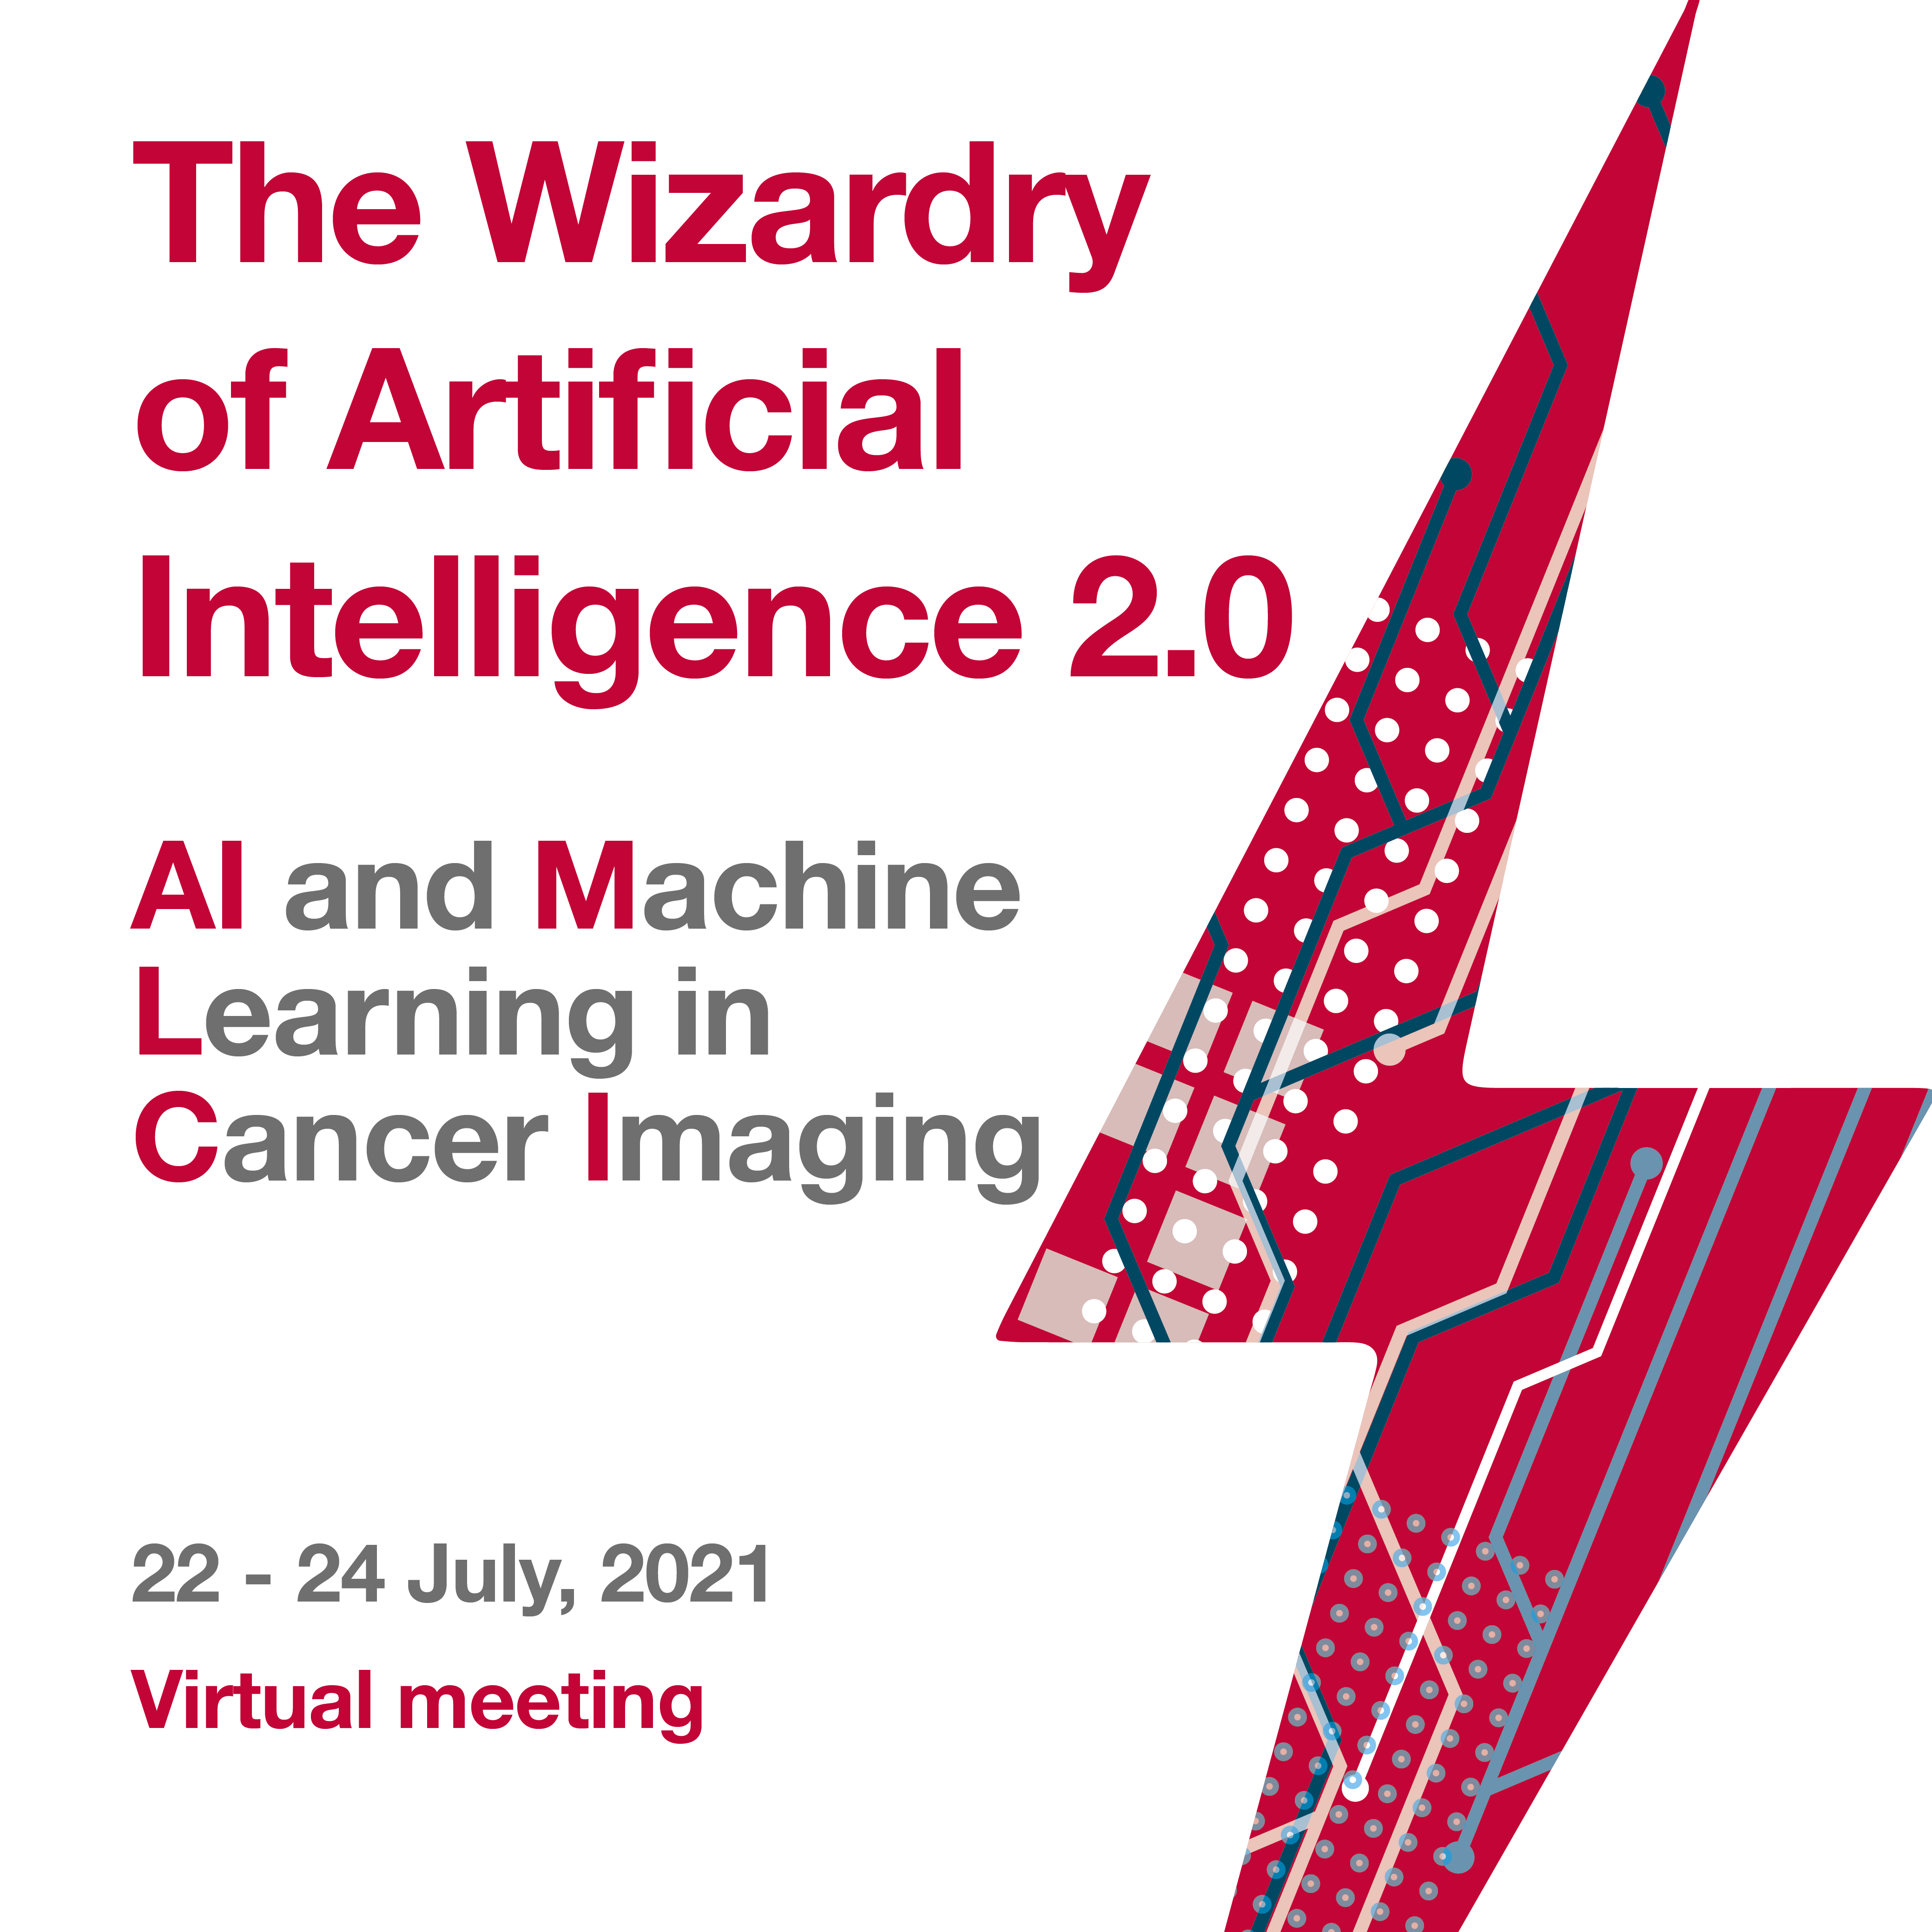 The Wizardry of AI and Machine Learning in Cancer Imaging